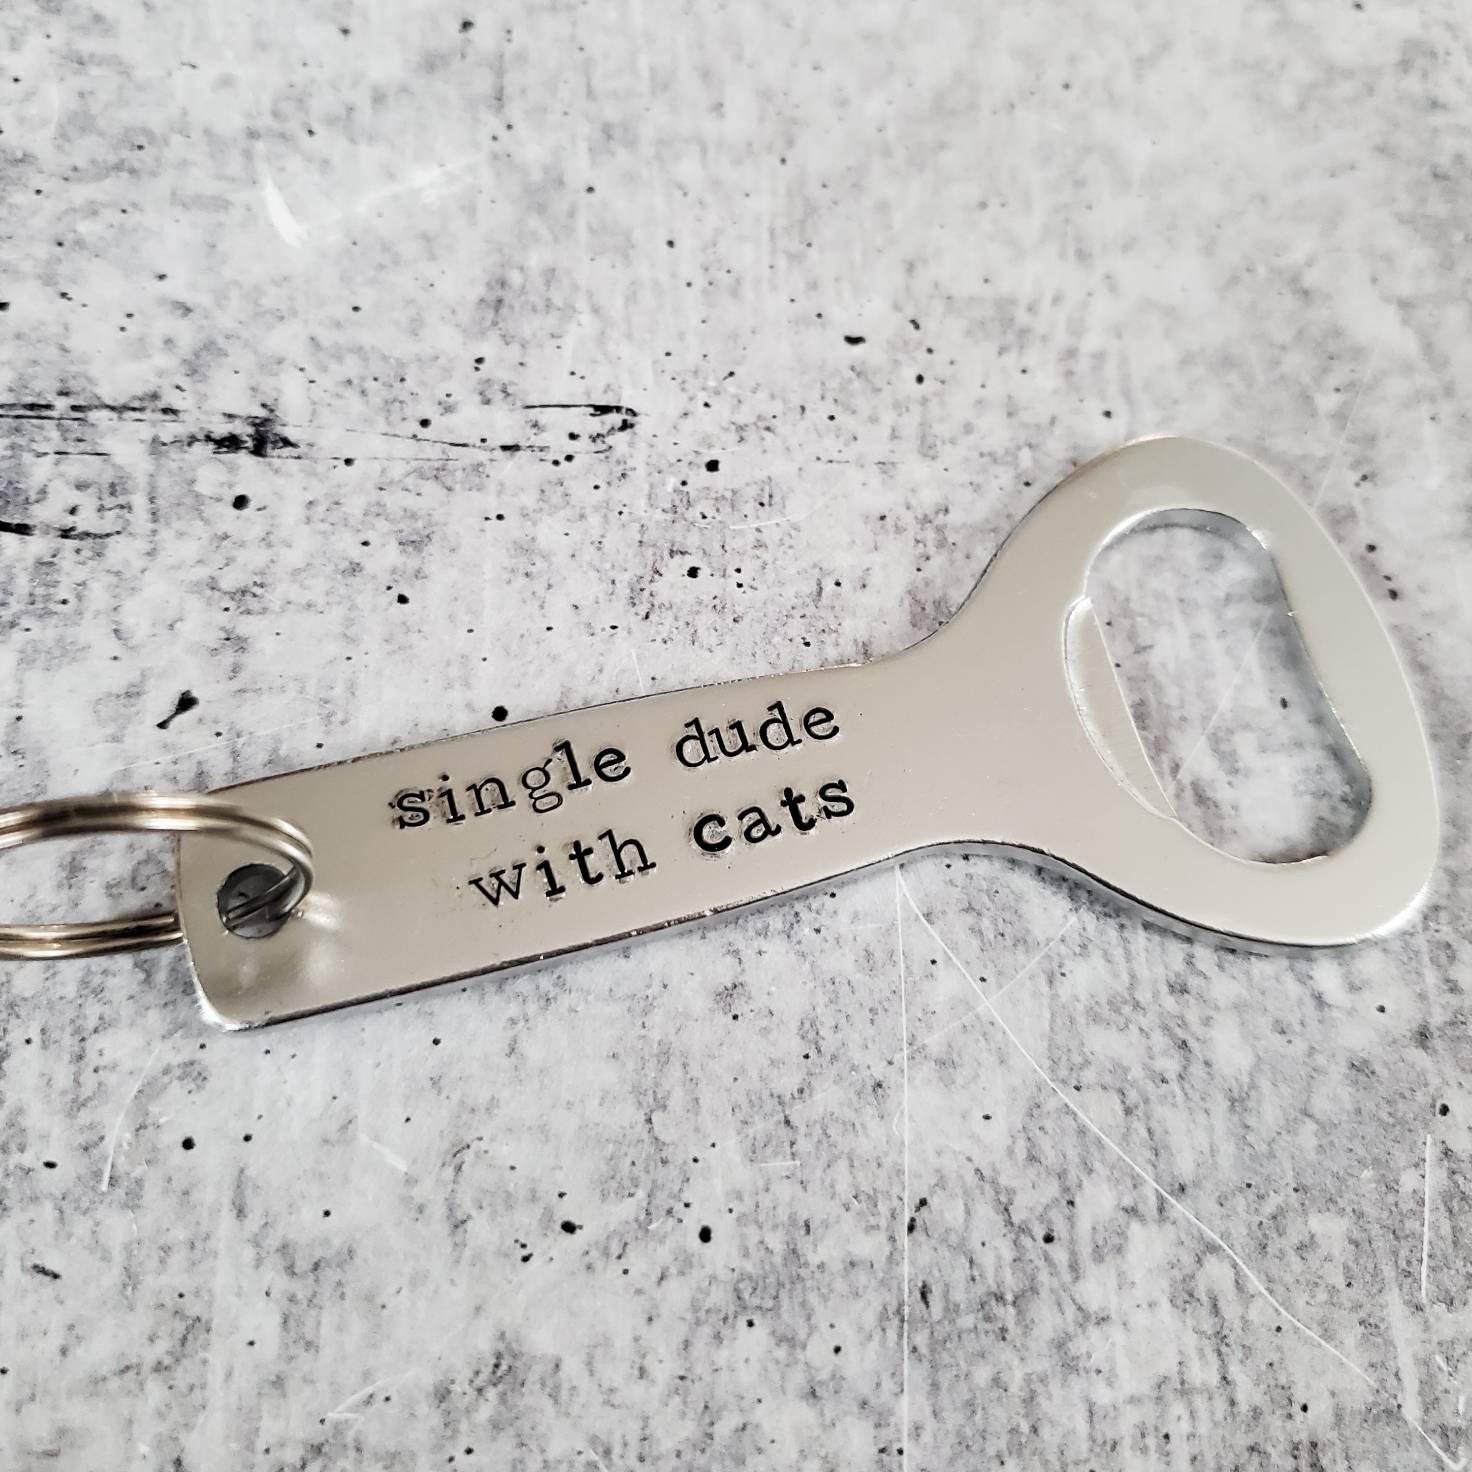 SINGLE DUDE WITH CATS Bottle Opener Keychain Salt and Sparkle